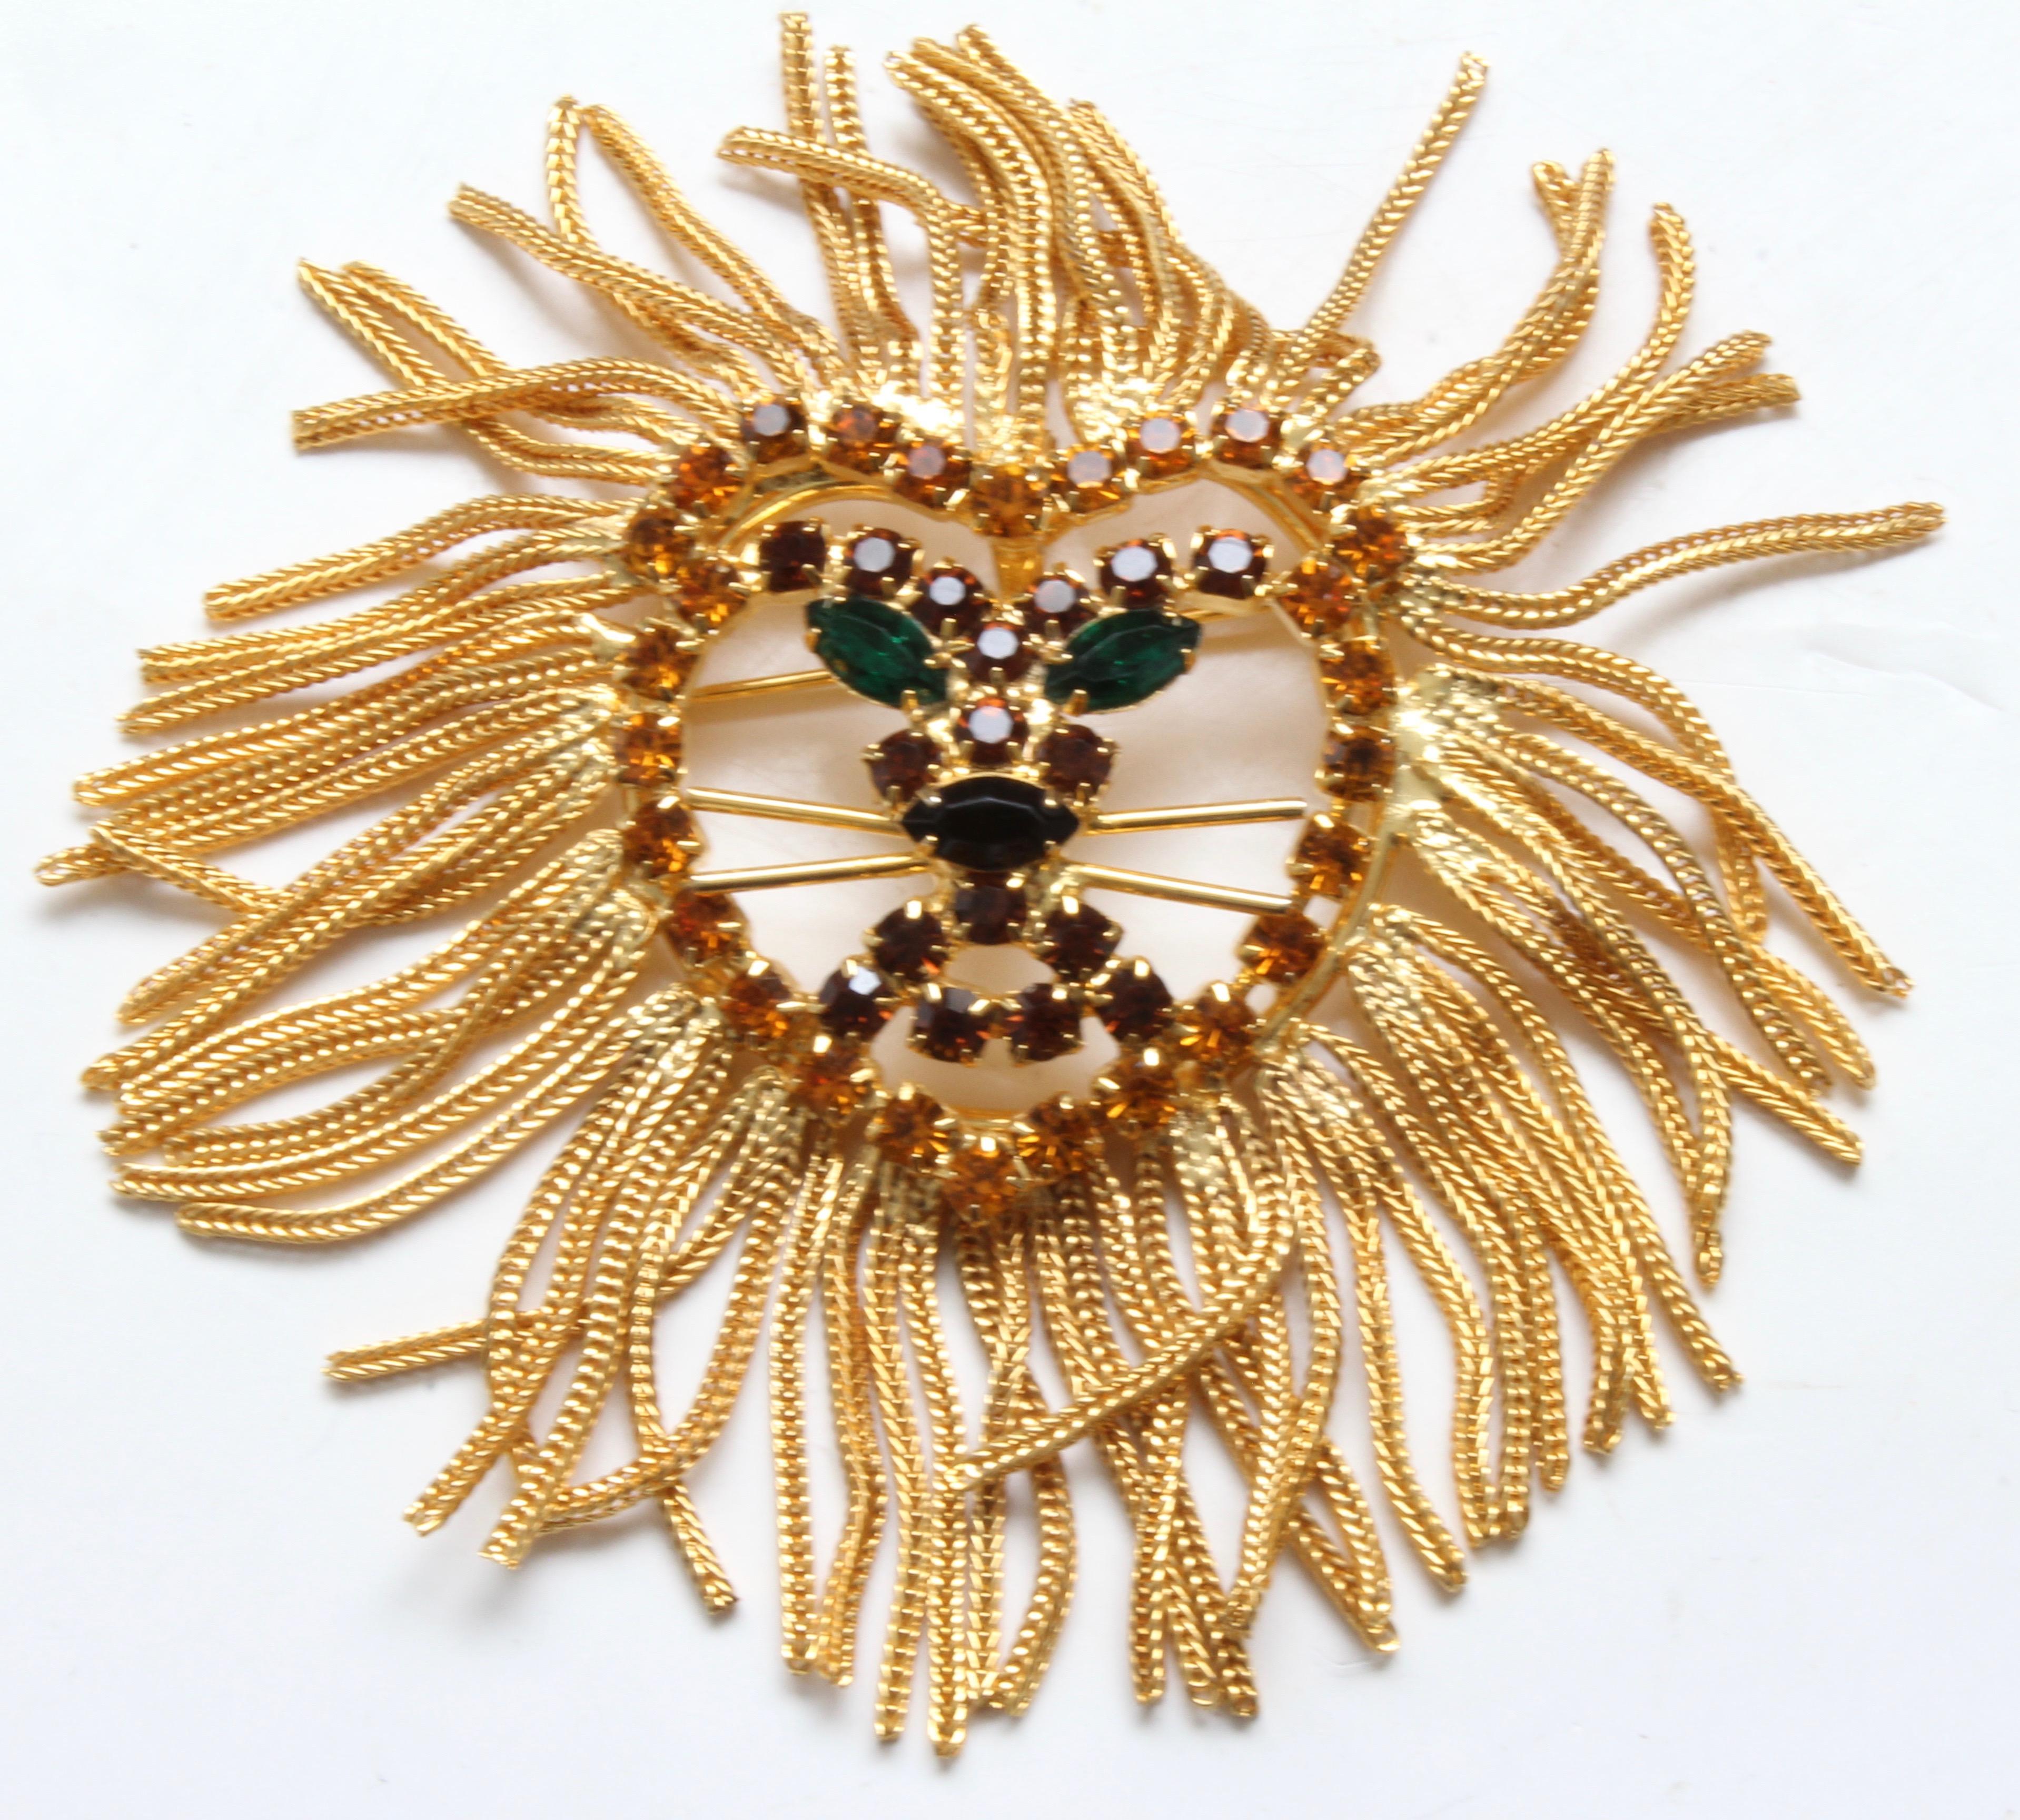 This fabulous large lion head features colored rhinestones and a shaggy chain fringe mane, created in the style of Dominique, aka Dominic De Tora, who also designed costume pieces for Weiss and Eisenberg.  This figural piece can be worn as a brooch